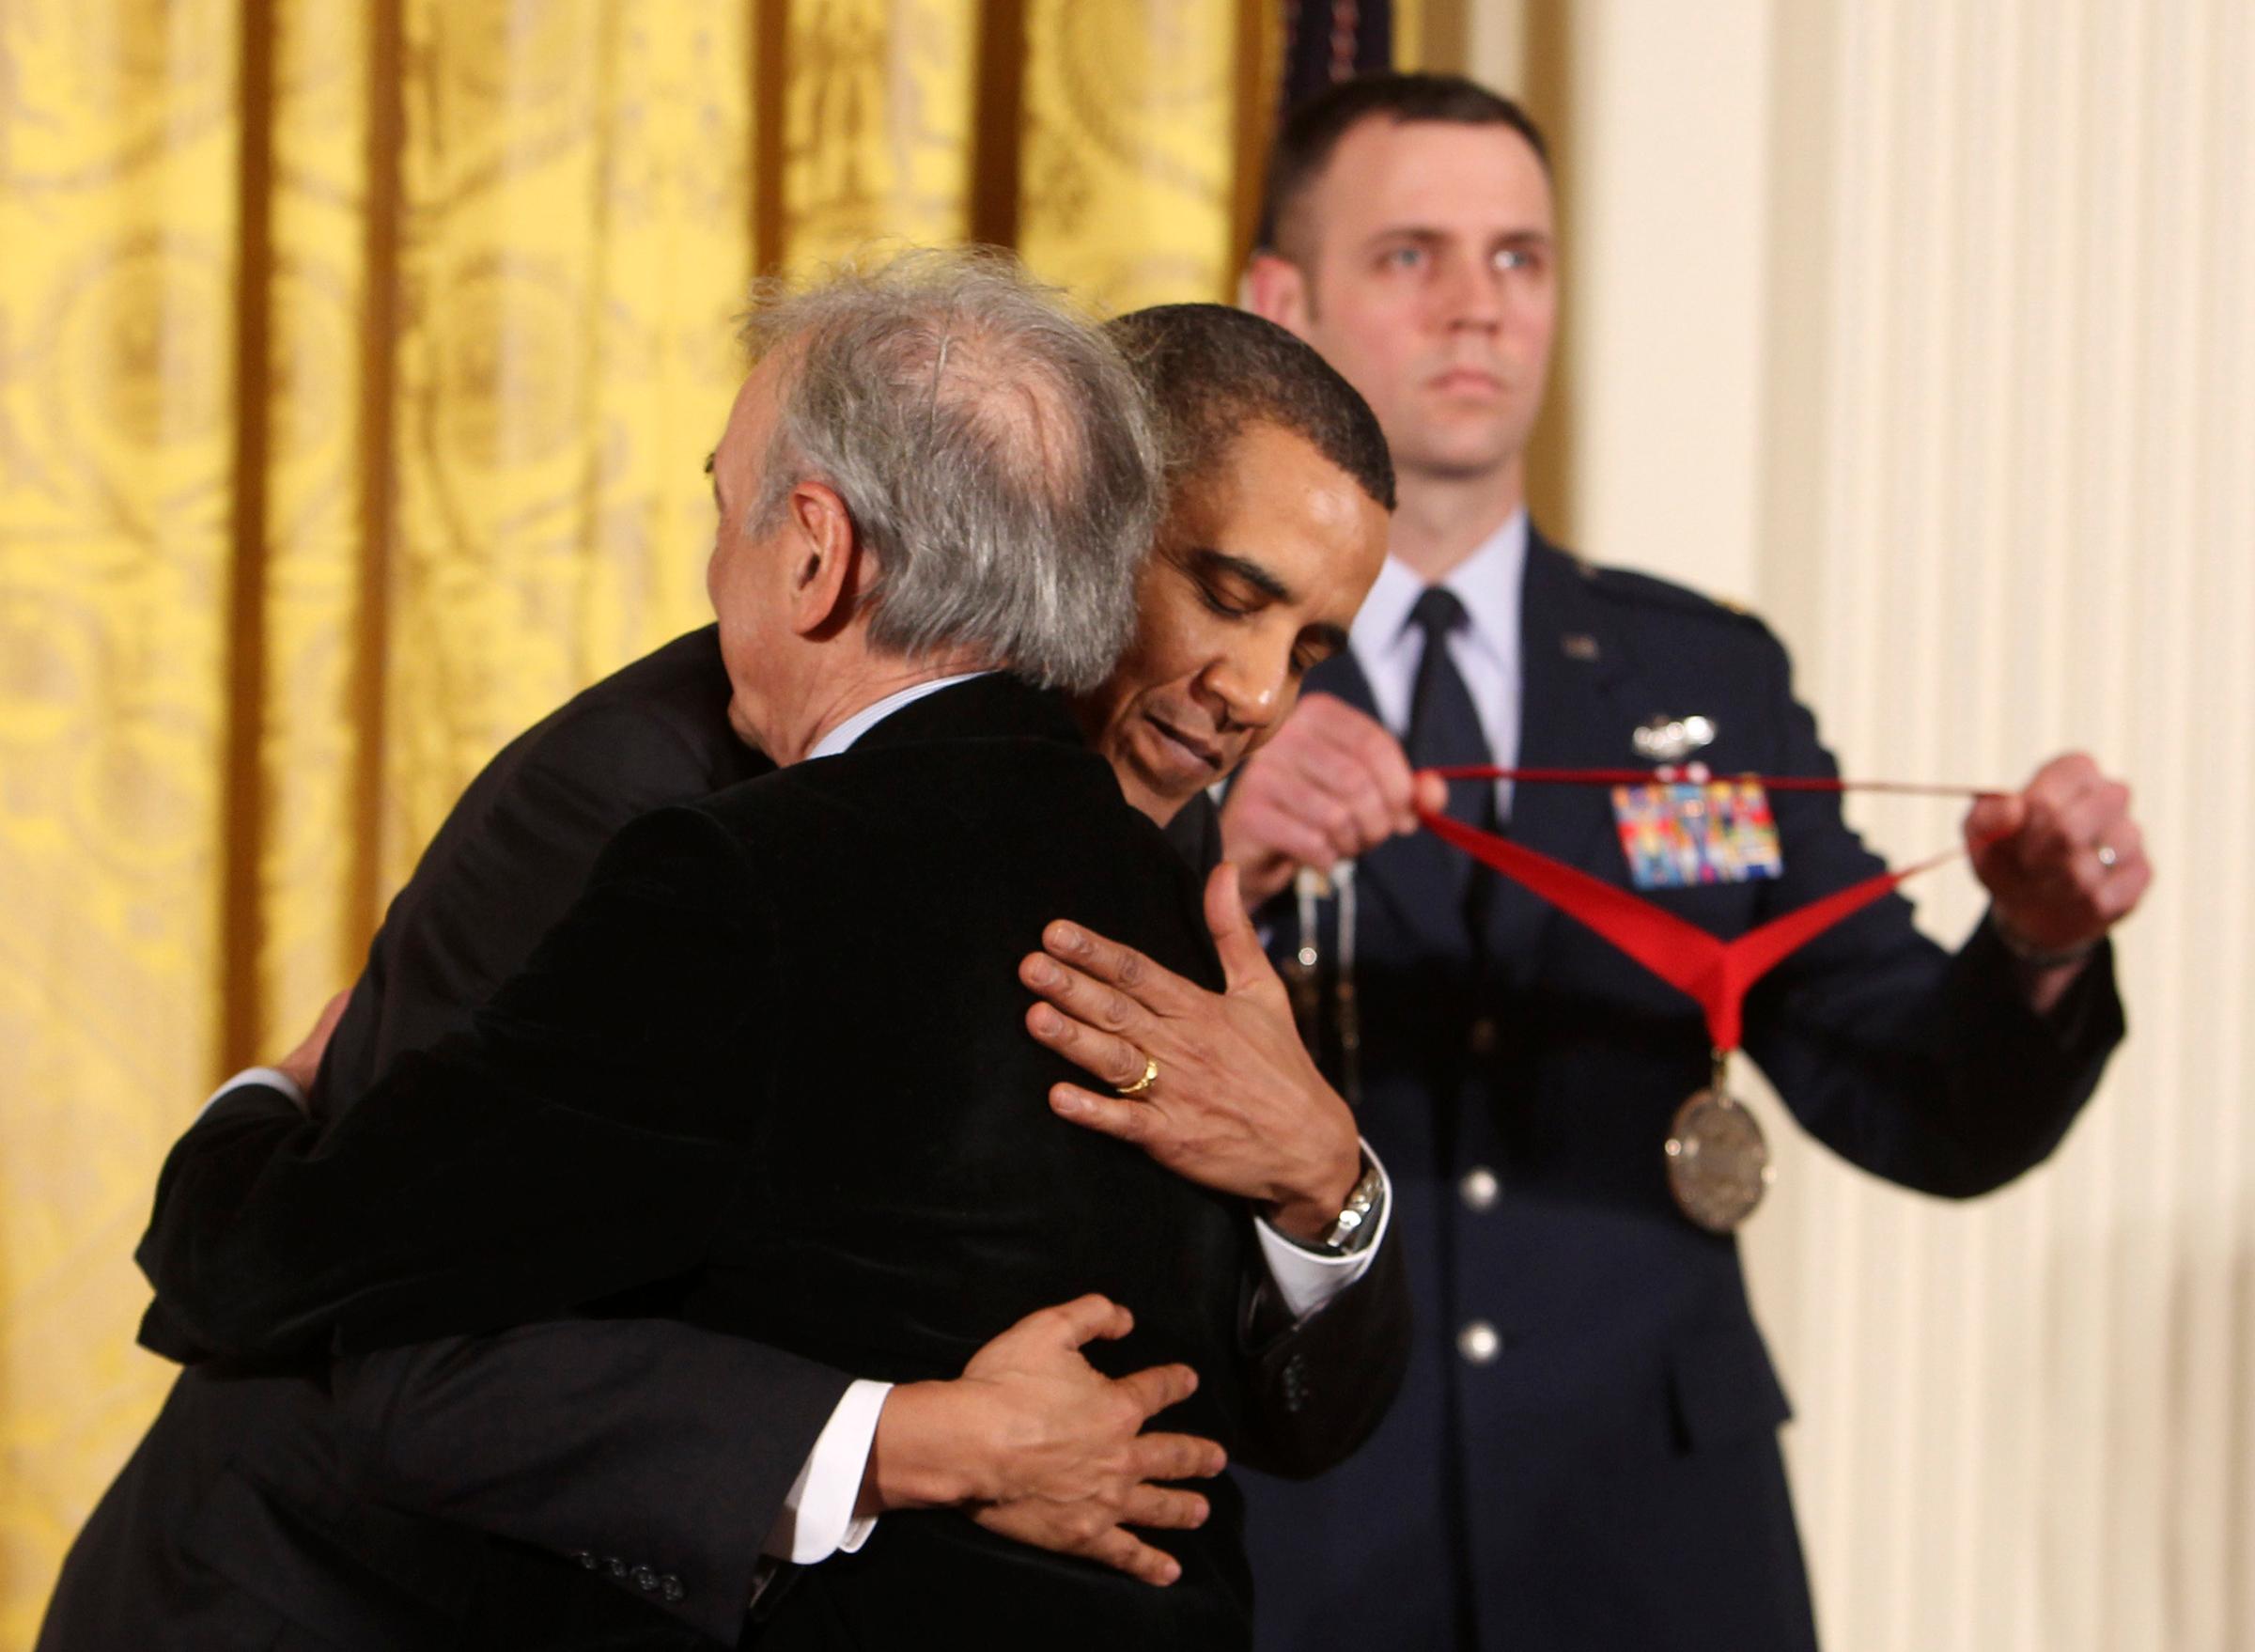 President Barack Obama presents the 2009 National Humanities Medal to Holocaust survivor Elie Wiesel in the East Room of the White House in Washington, on Feb. 25, 2010.